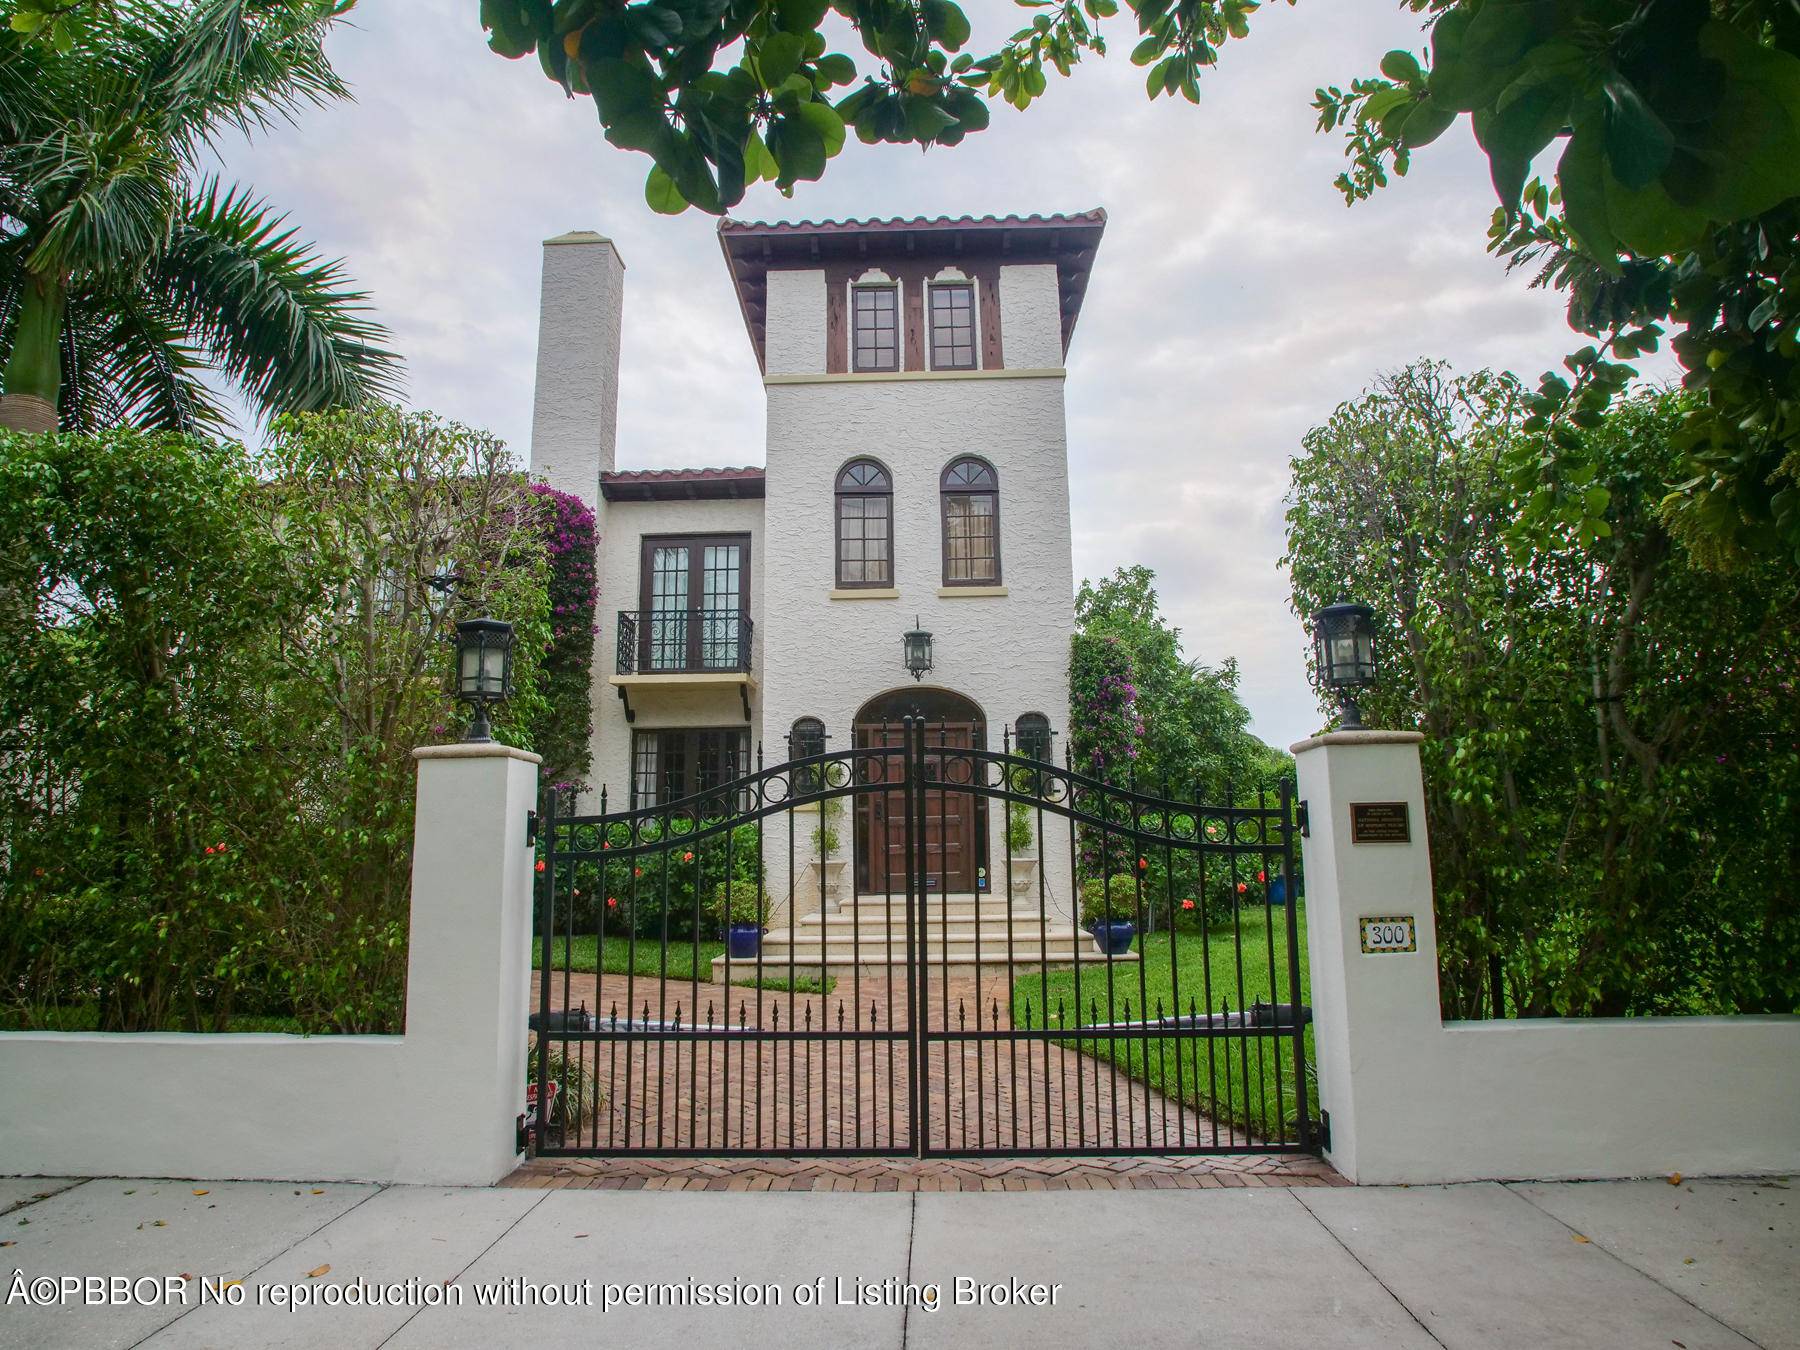 With a commanding presence on a prominent corner lot in El Cid, this magnificent Mediterranean home is listed on the National Register of Historic Places.